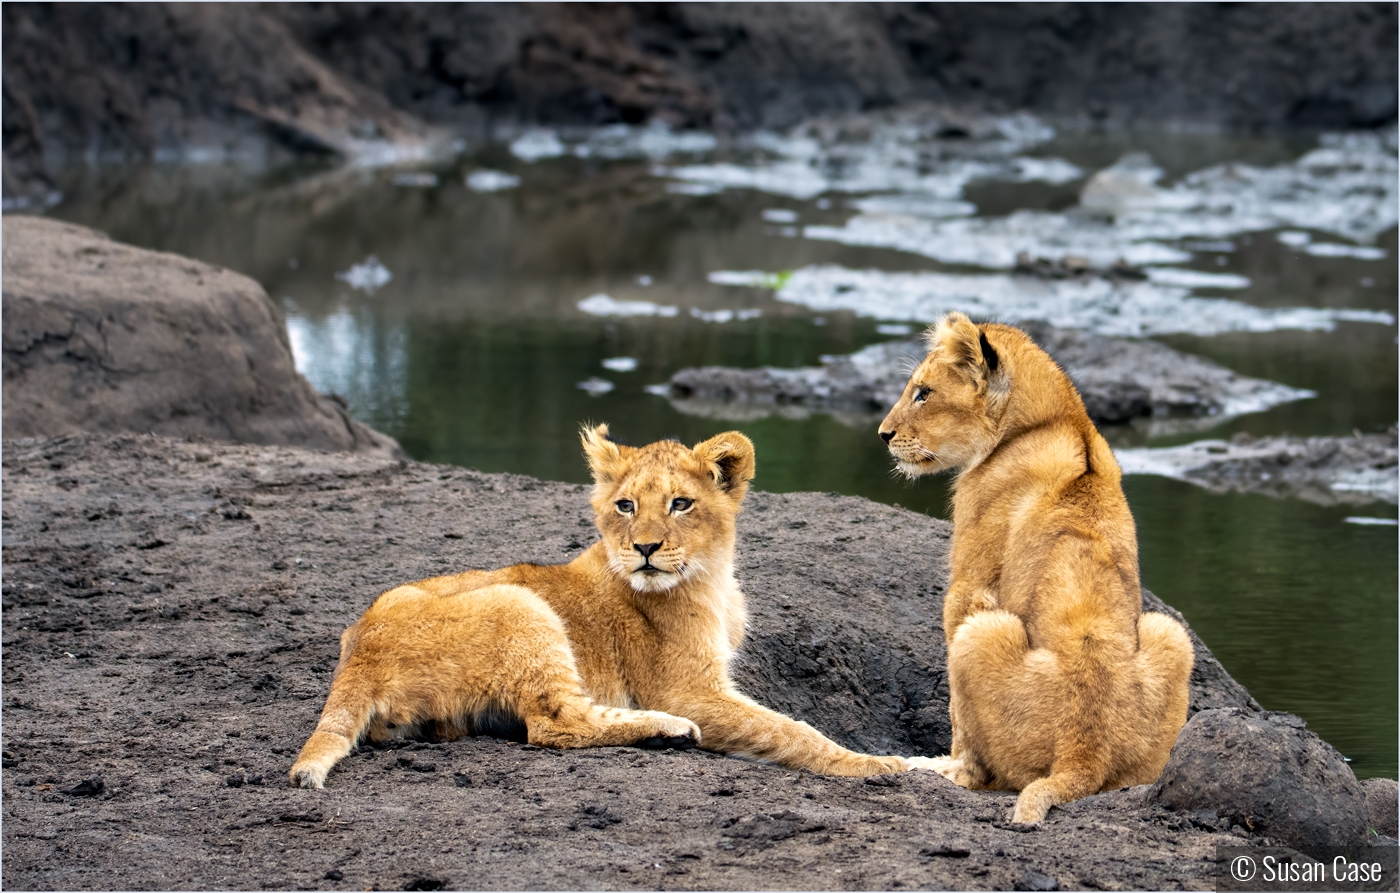 The cub's water hole by Susan Case